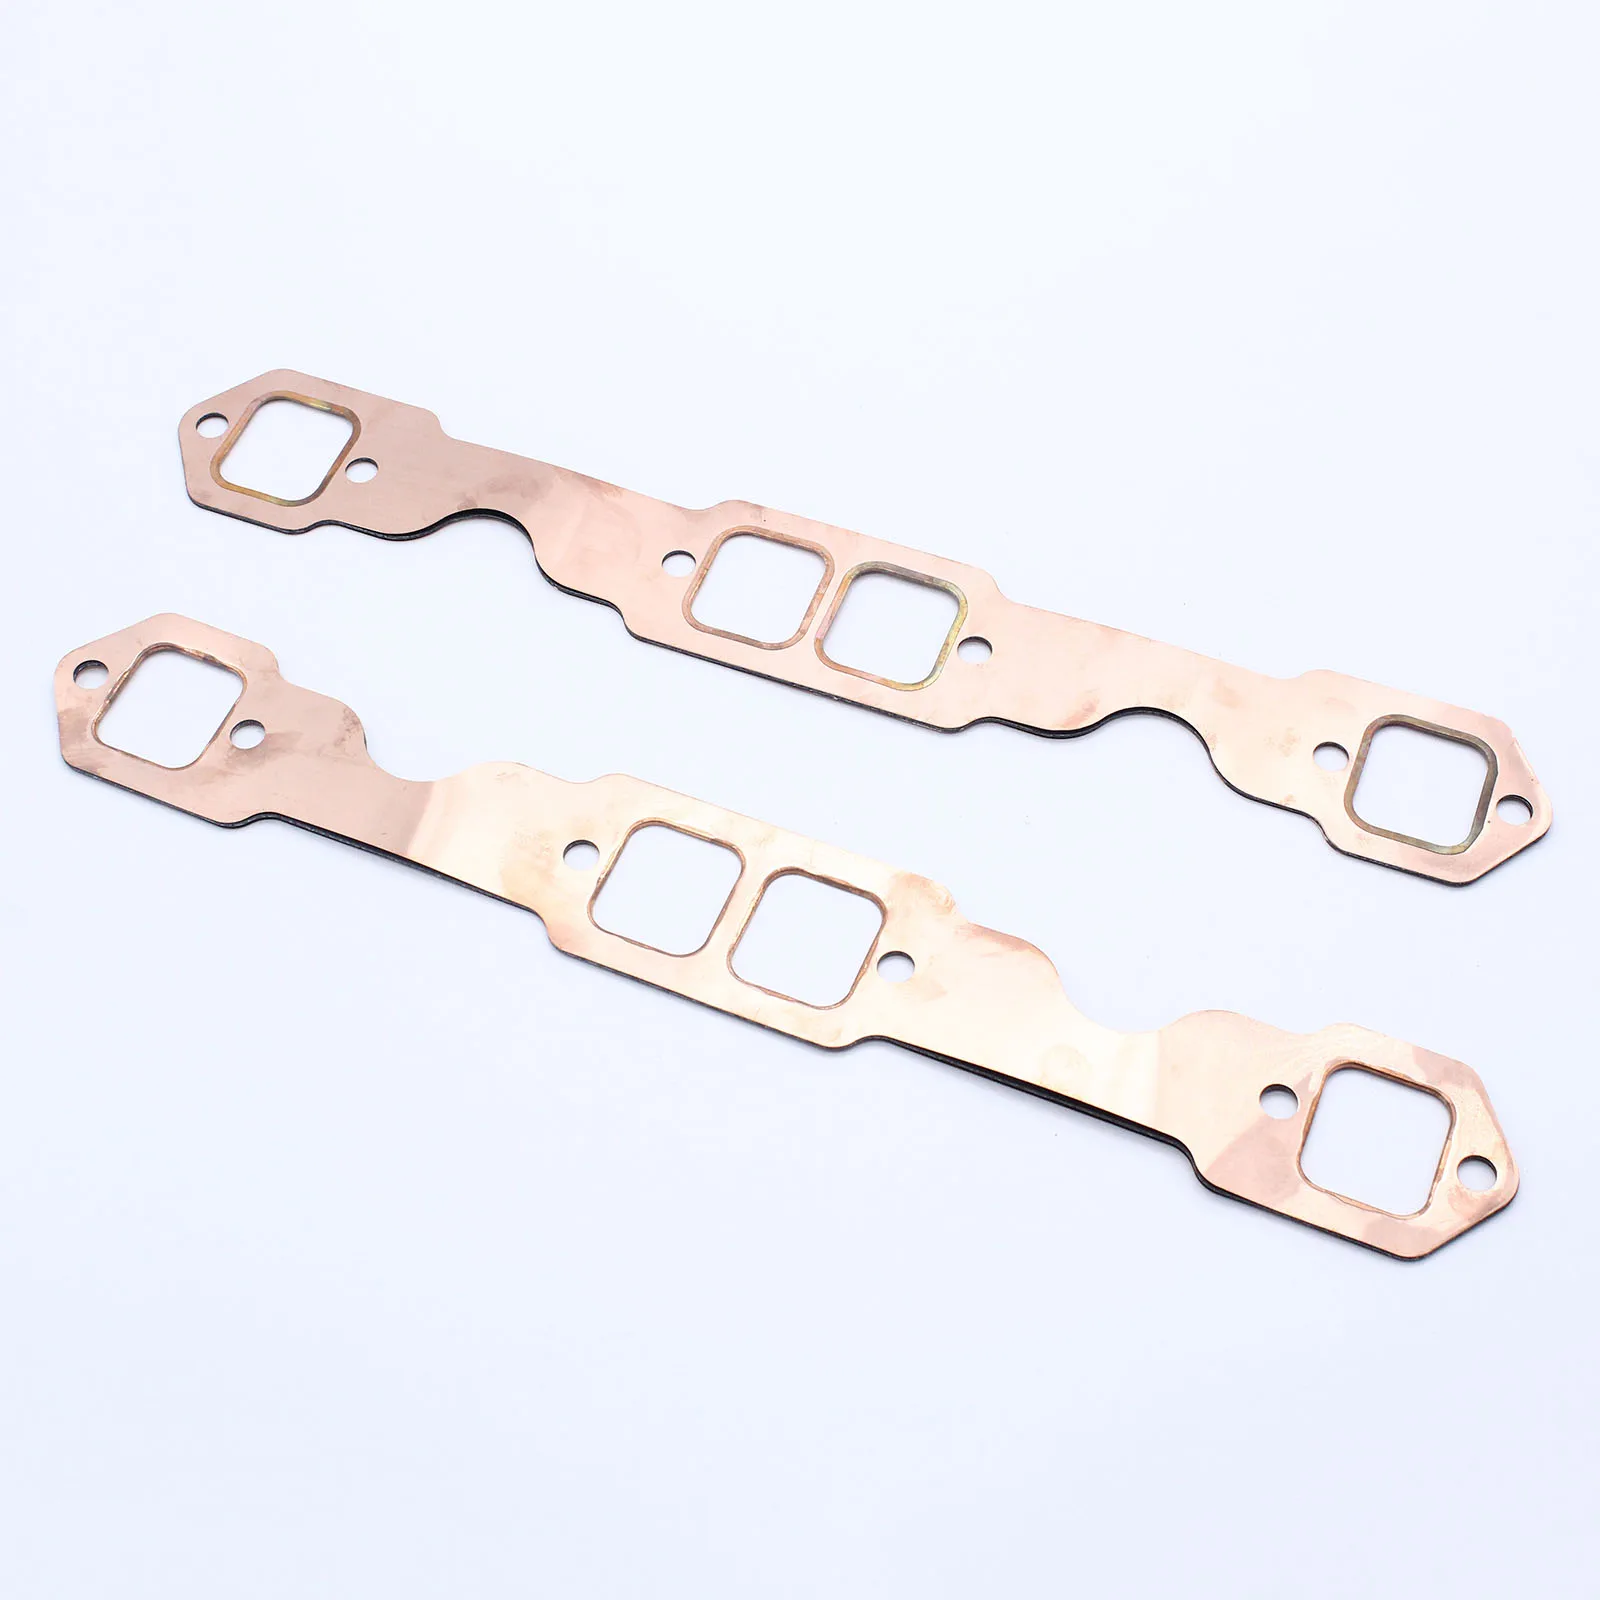 SBC Oval Port Copper Header Exhaust Gasket Seal For Chevy SB 327 305 350 383 Exhaust Manifold Gasket Set